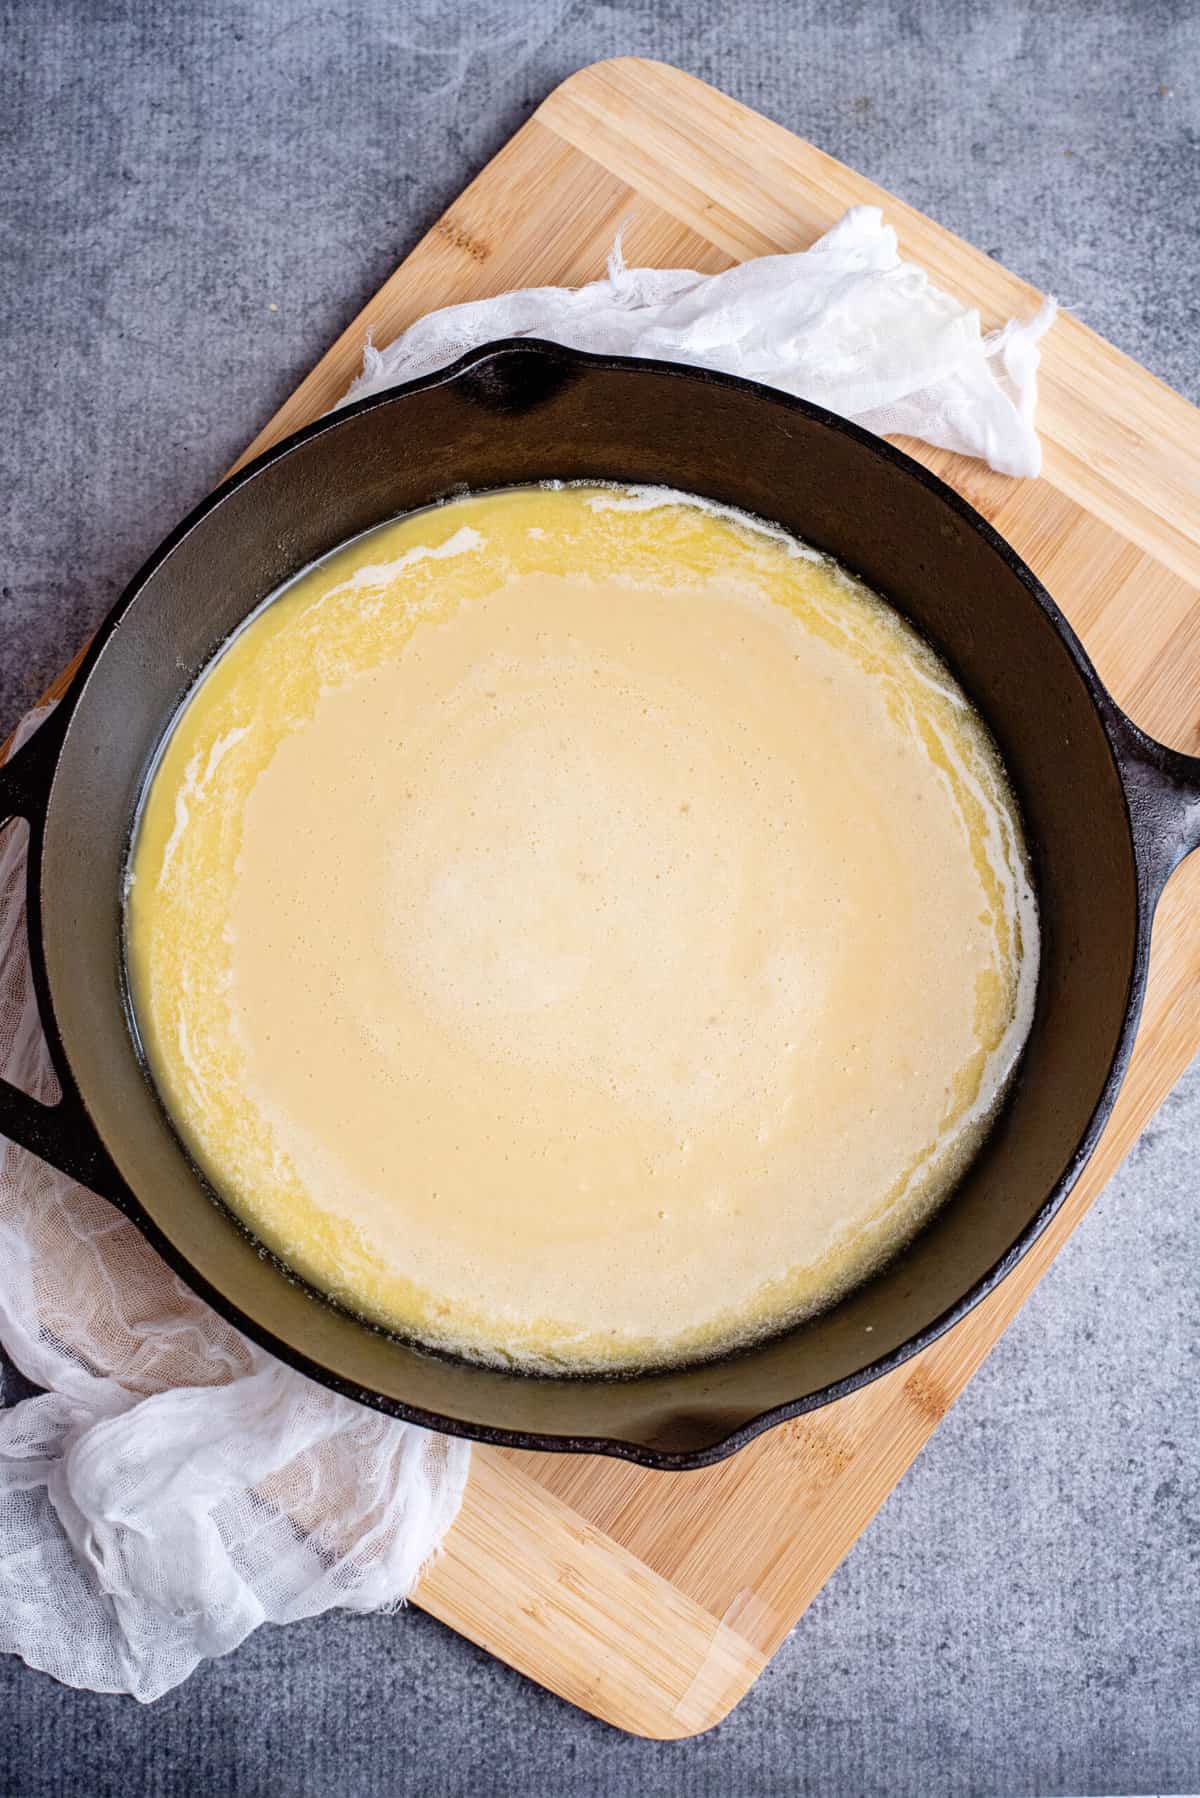 pour the vanilla dutch baby batter into the pan